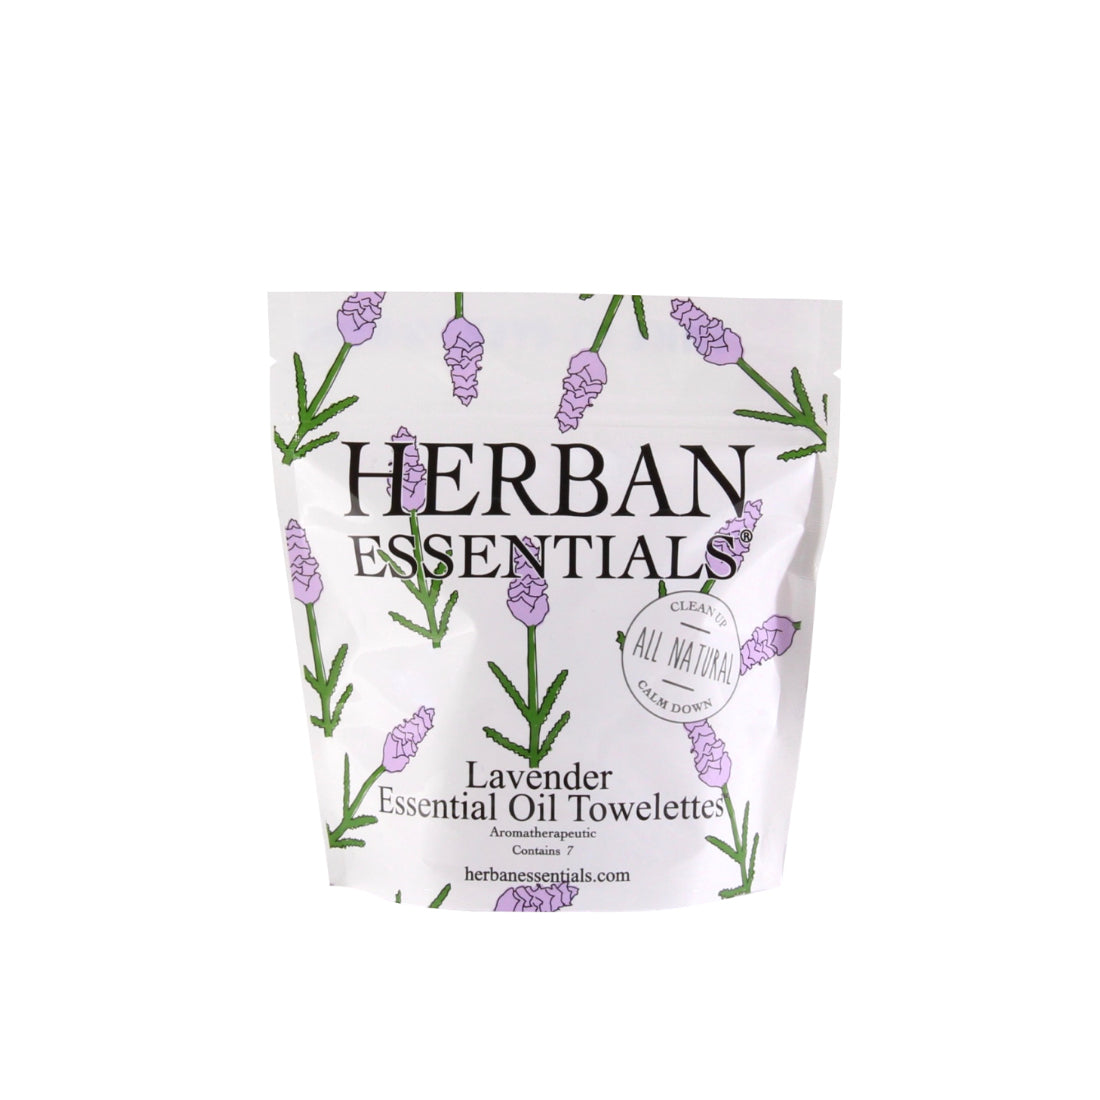 A white package of Herban Essentials Essential Oil Towelettes - Lavender Mini-Bags with purple lavender illustrations and green text, perfect for travel wipes.